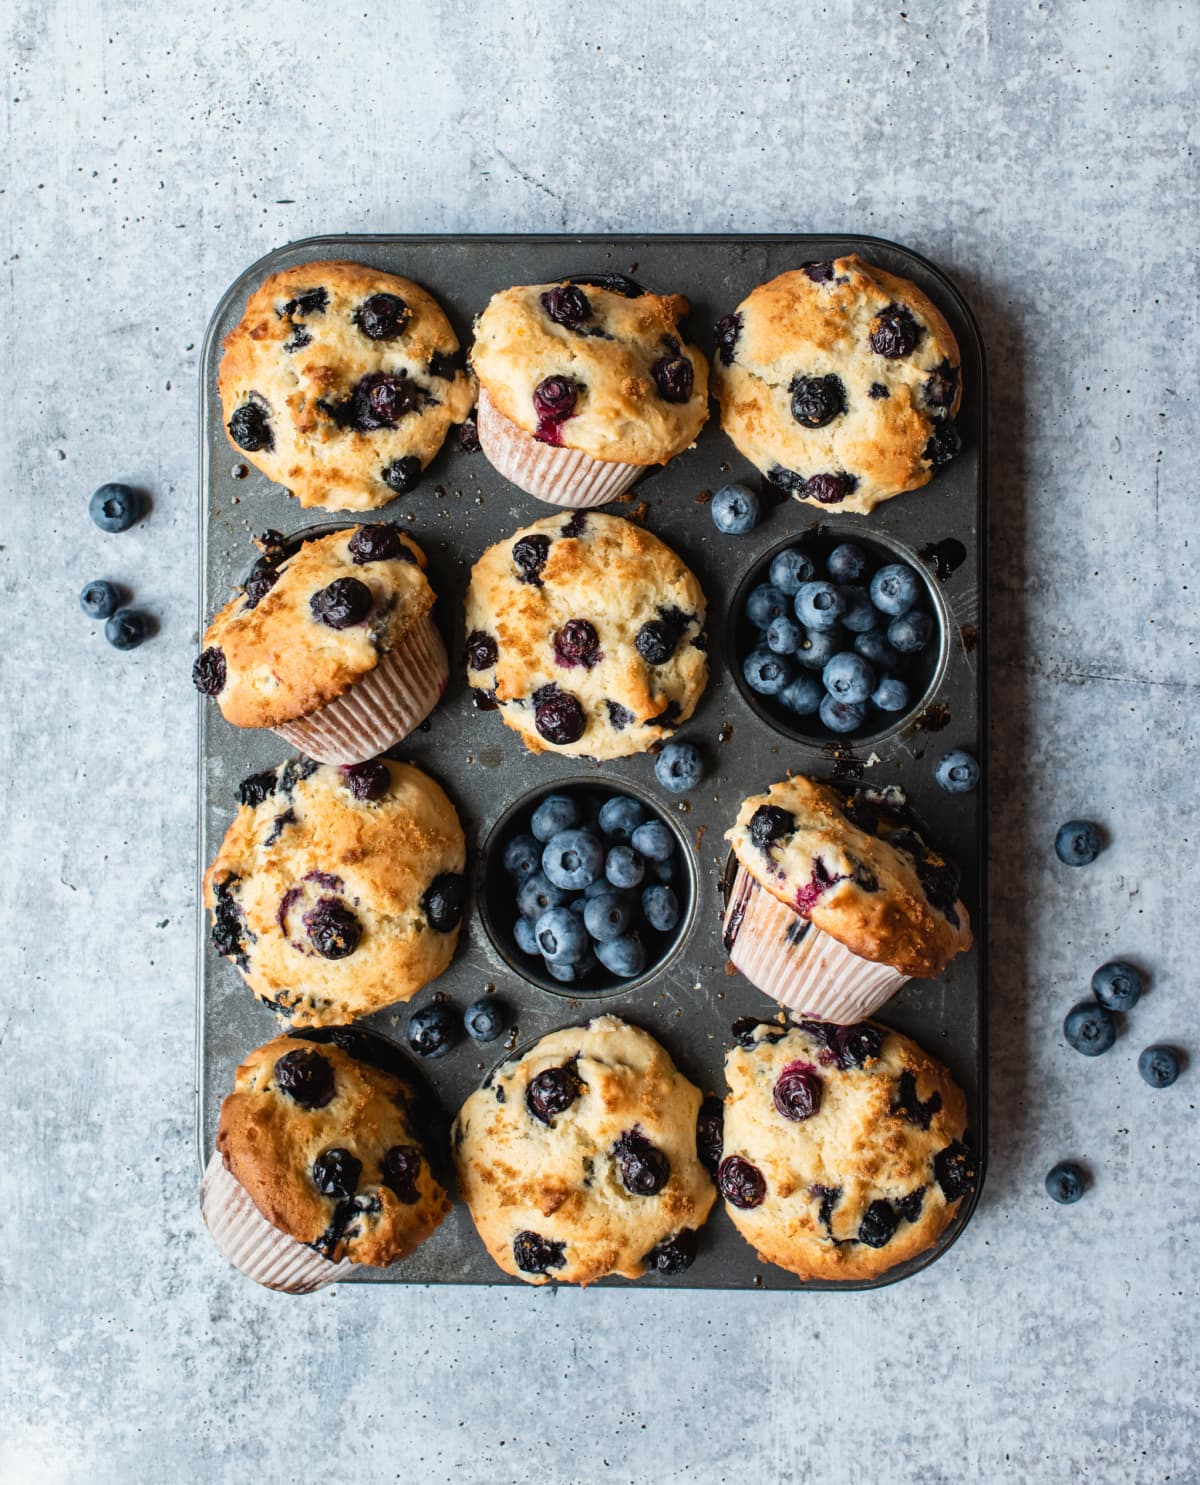 Blueberry muffins in a muffin tin with whole blueberries